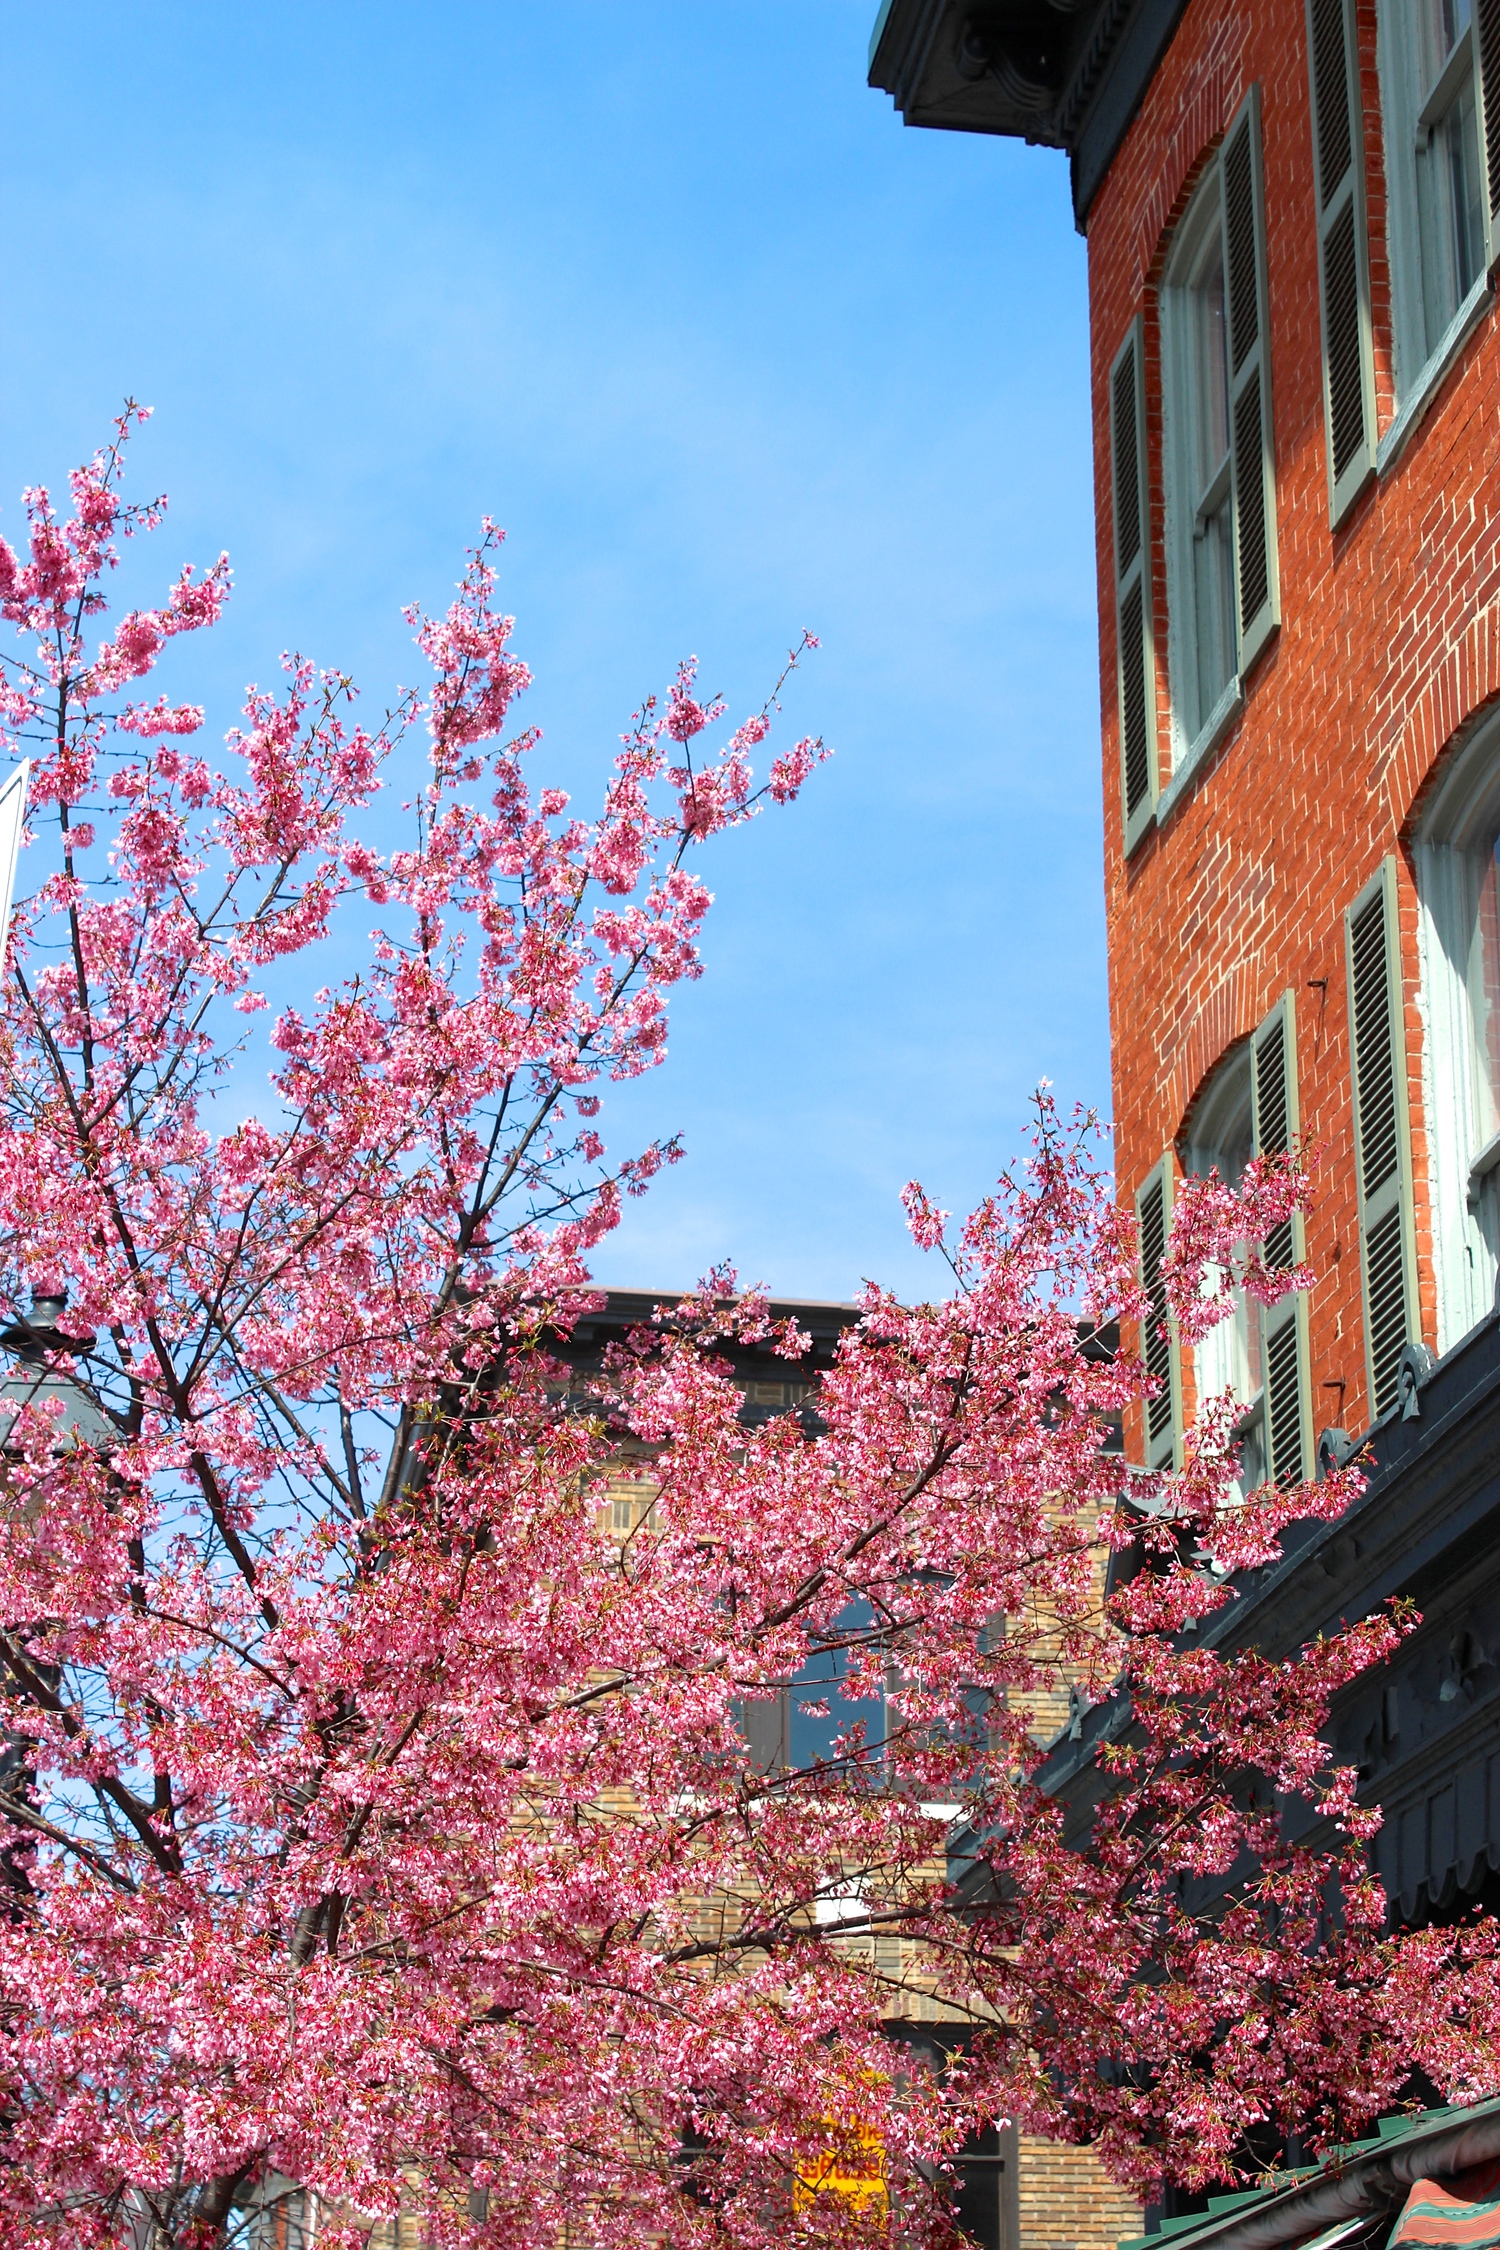 Cherry Blossoms blooming in Baltimore!